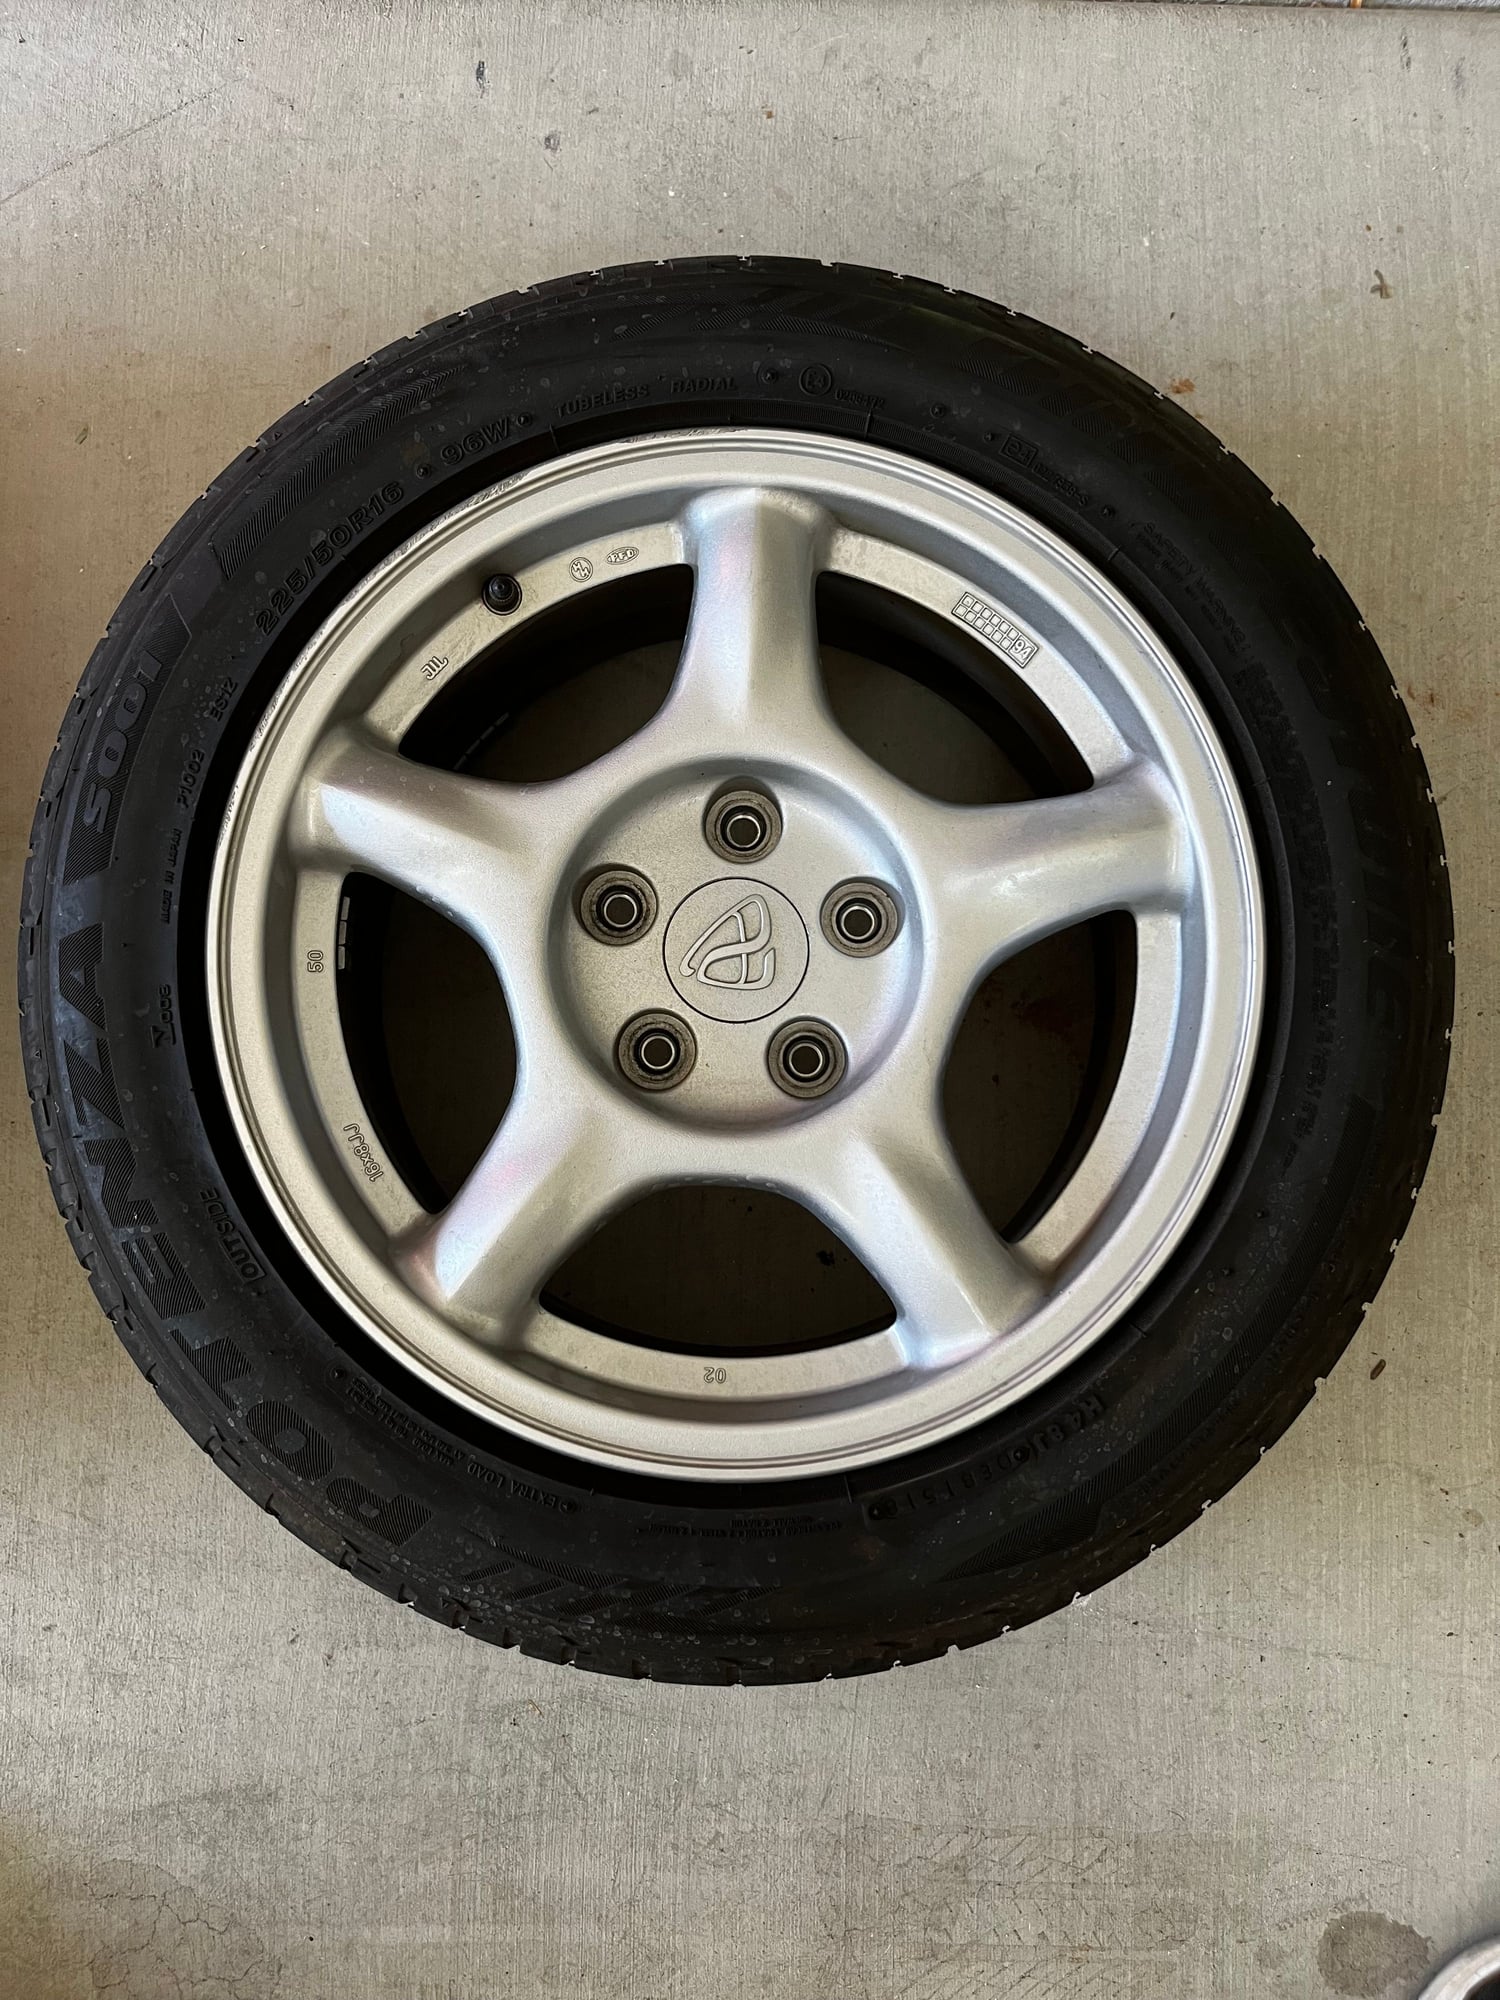 Wheels and Tires/Axles - Stock FD wheels and tires - Used - 1993 to 2002 Mazda RX-7 - Gilbert, AZ 85234, United States